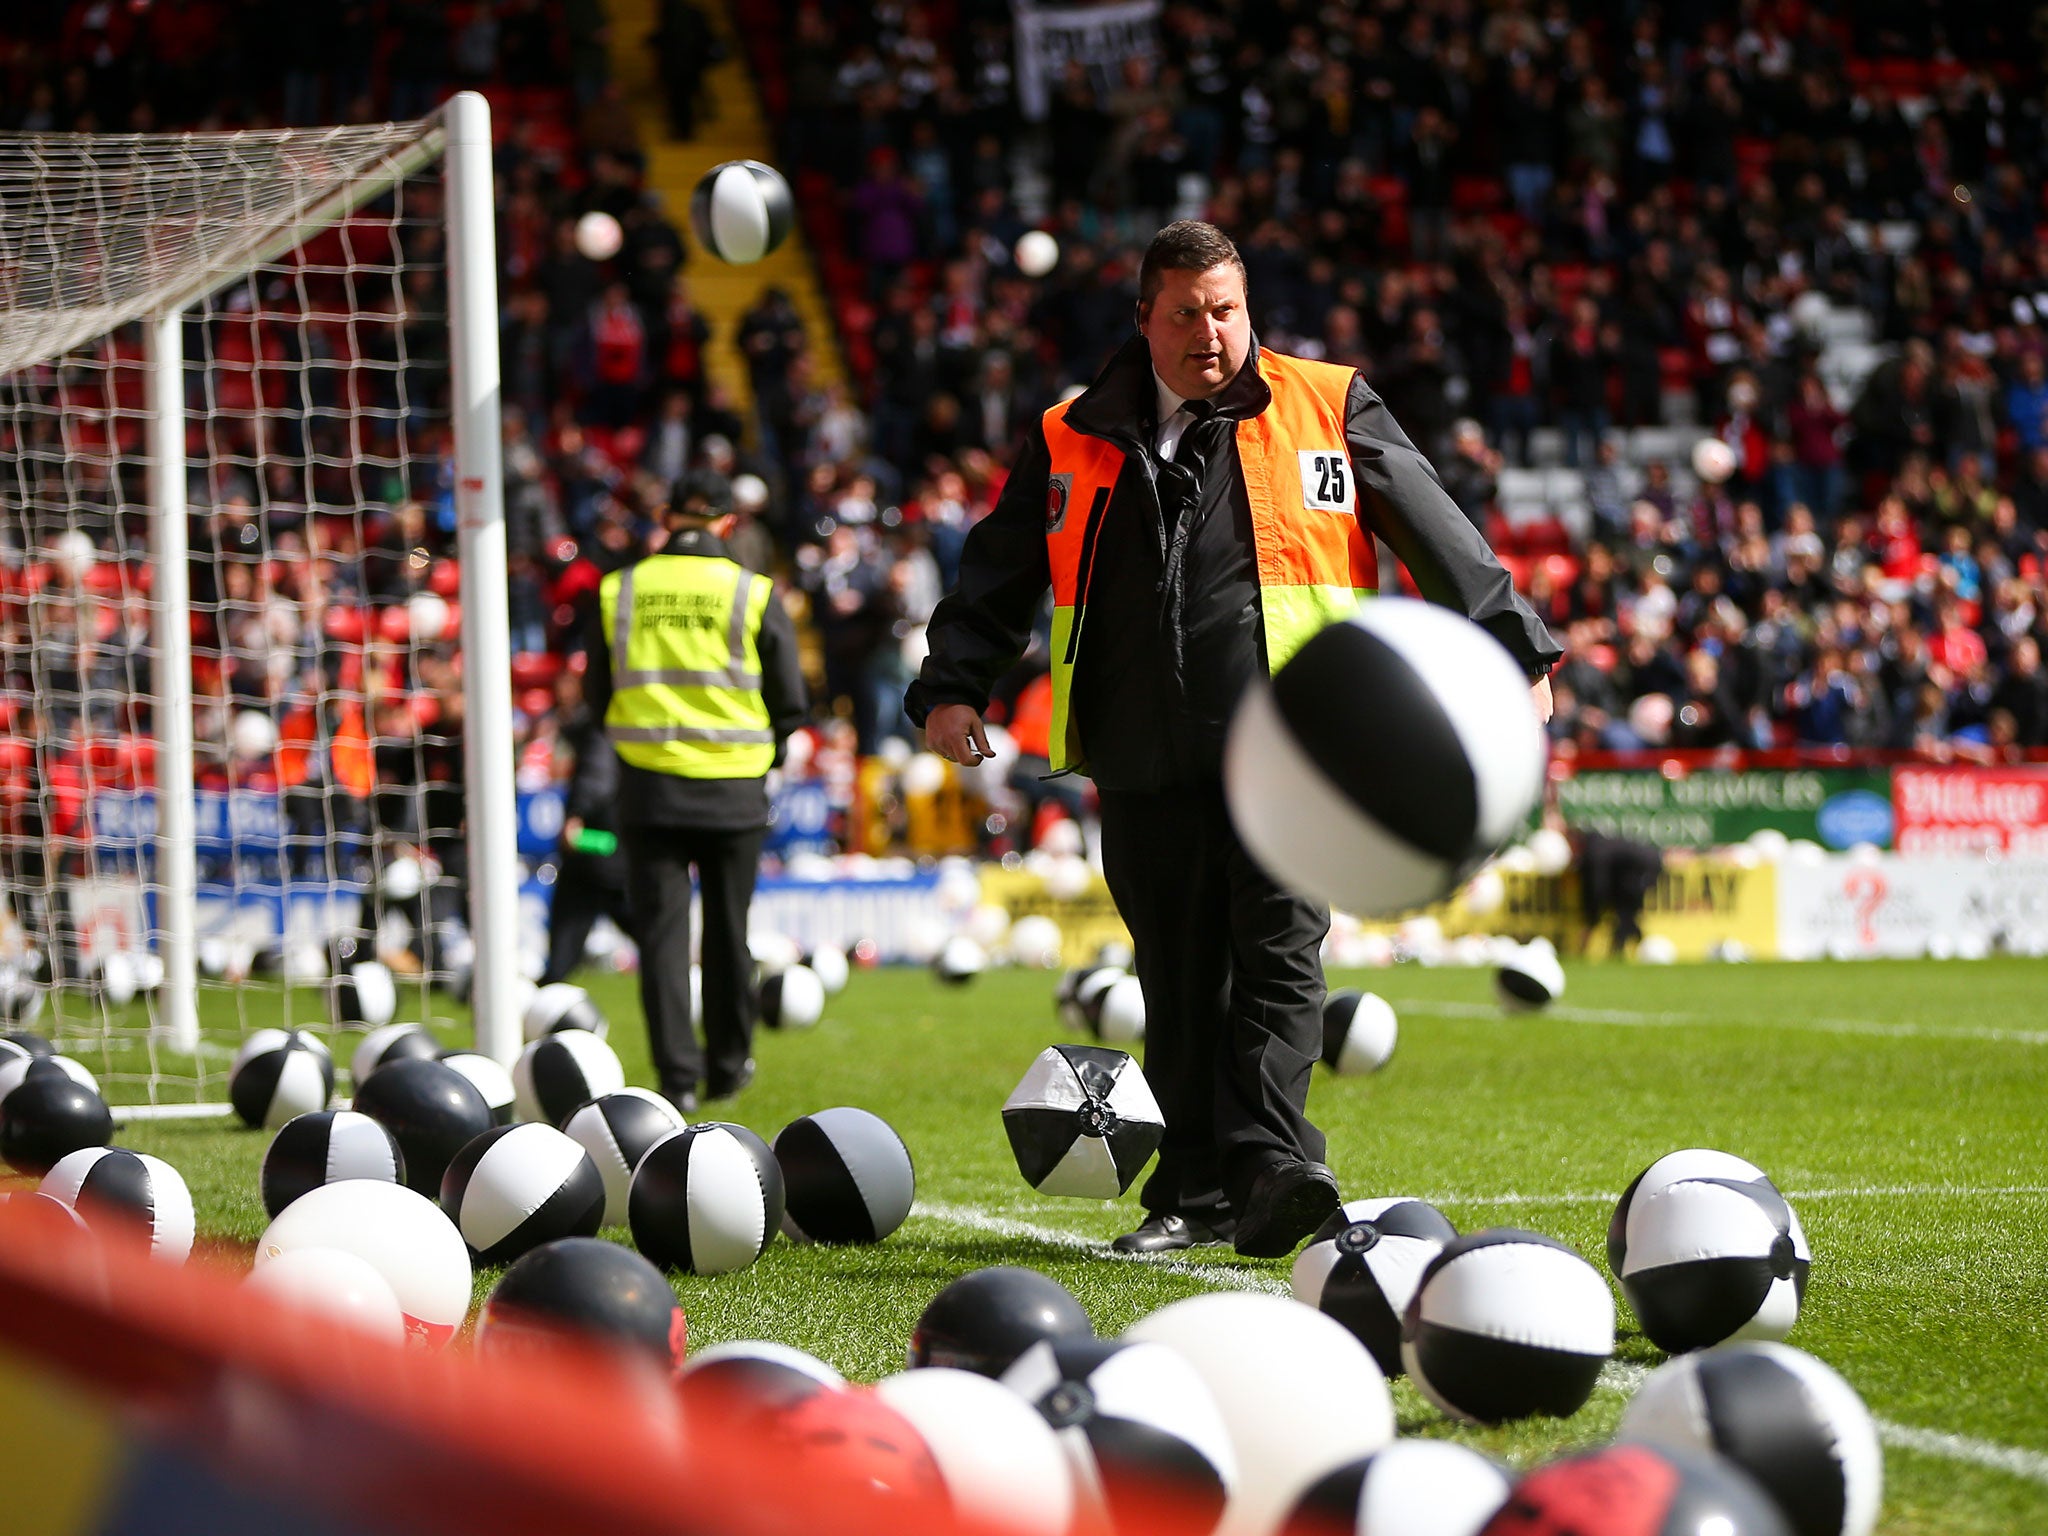 Charlton stewards clear beach balls from the pitch